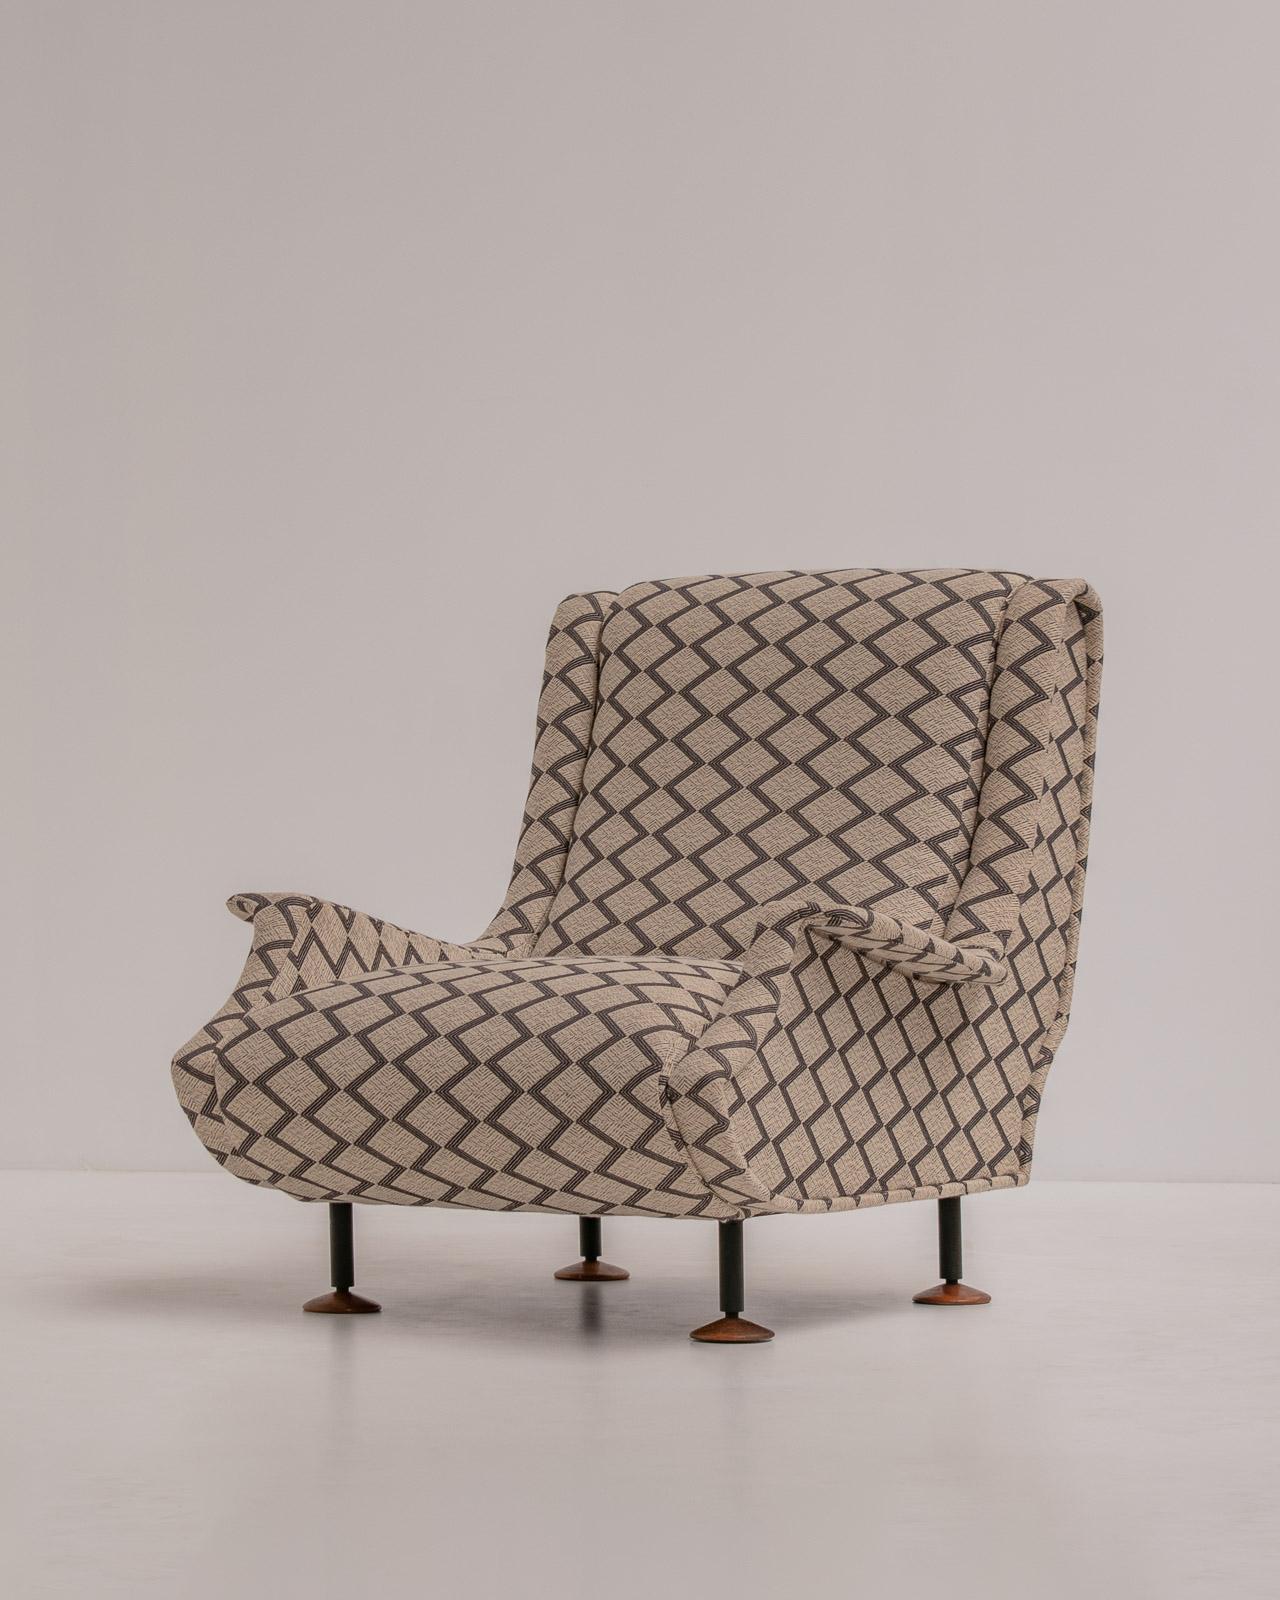 Introducing the epitome of Italian Midcentury design: the Marco Zanuso Regent Lounge Chair designed for Arflex during the 1960s. It is a true masterpiece of elegance, sophistication, and comfort. Upholstered in an exquisite zig-zag Pierre Frey